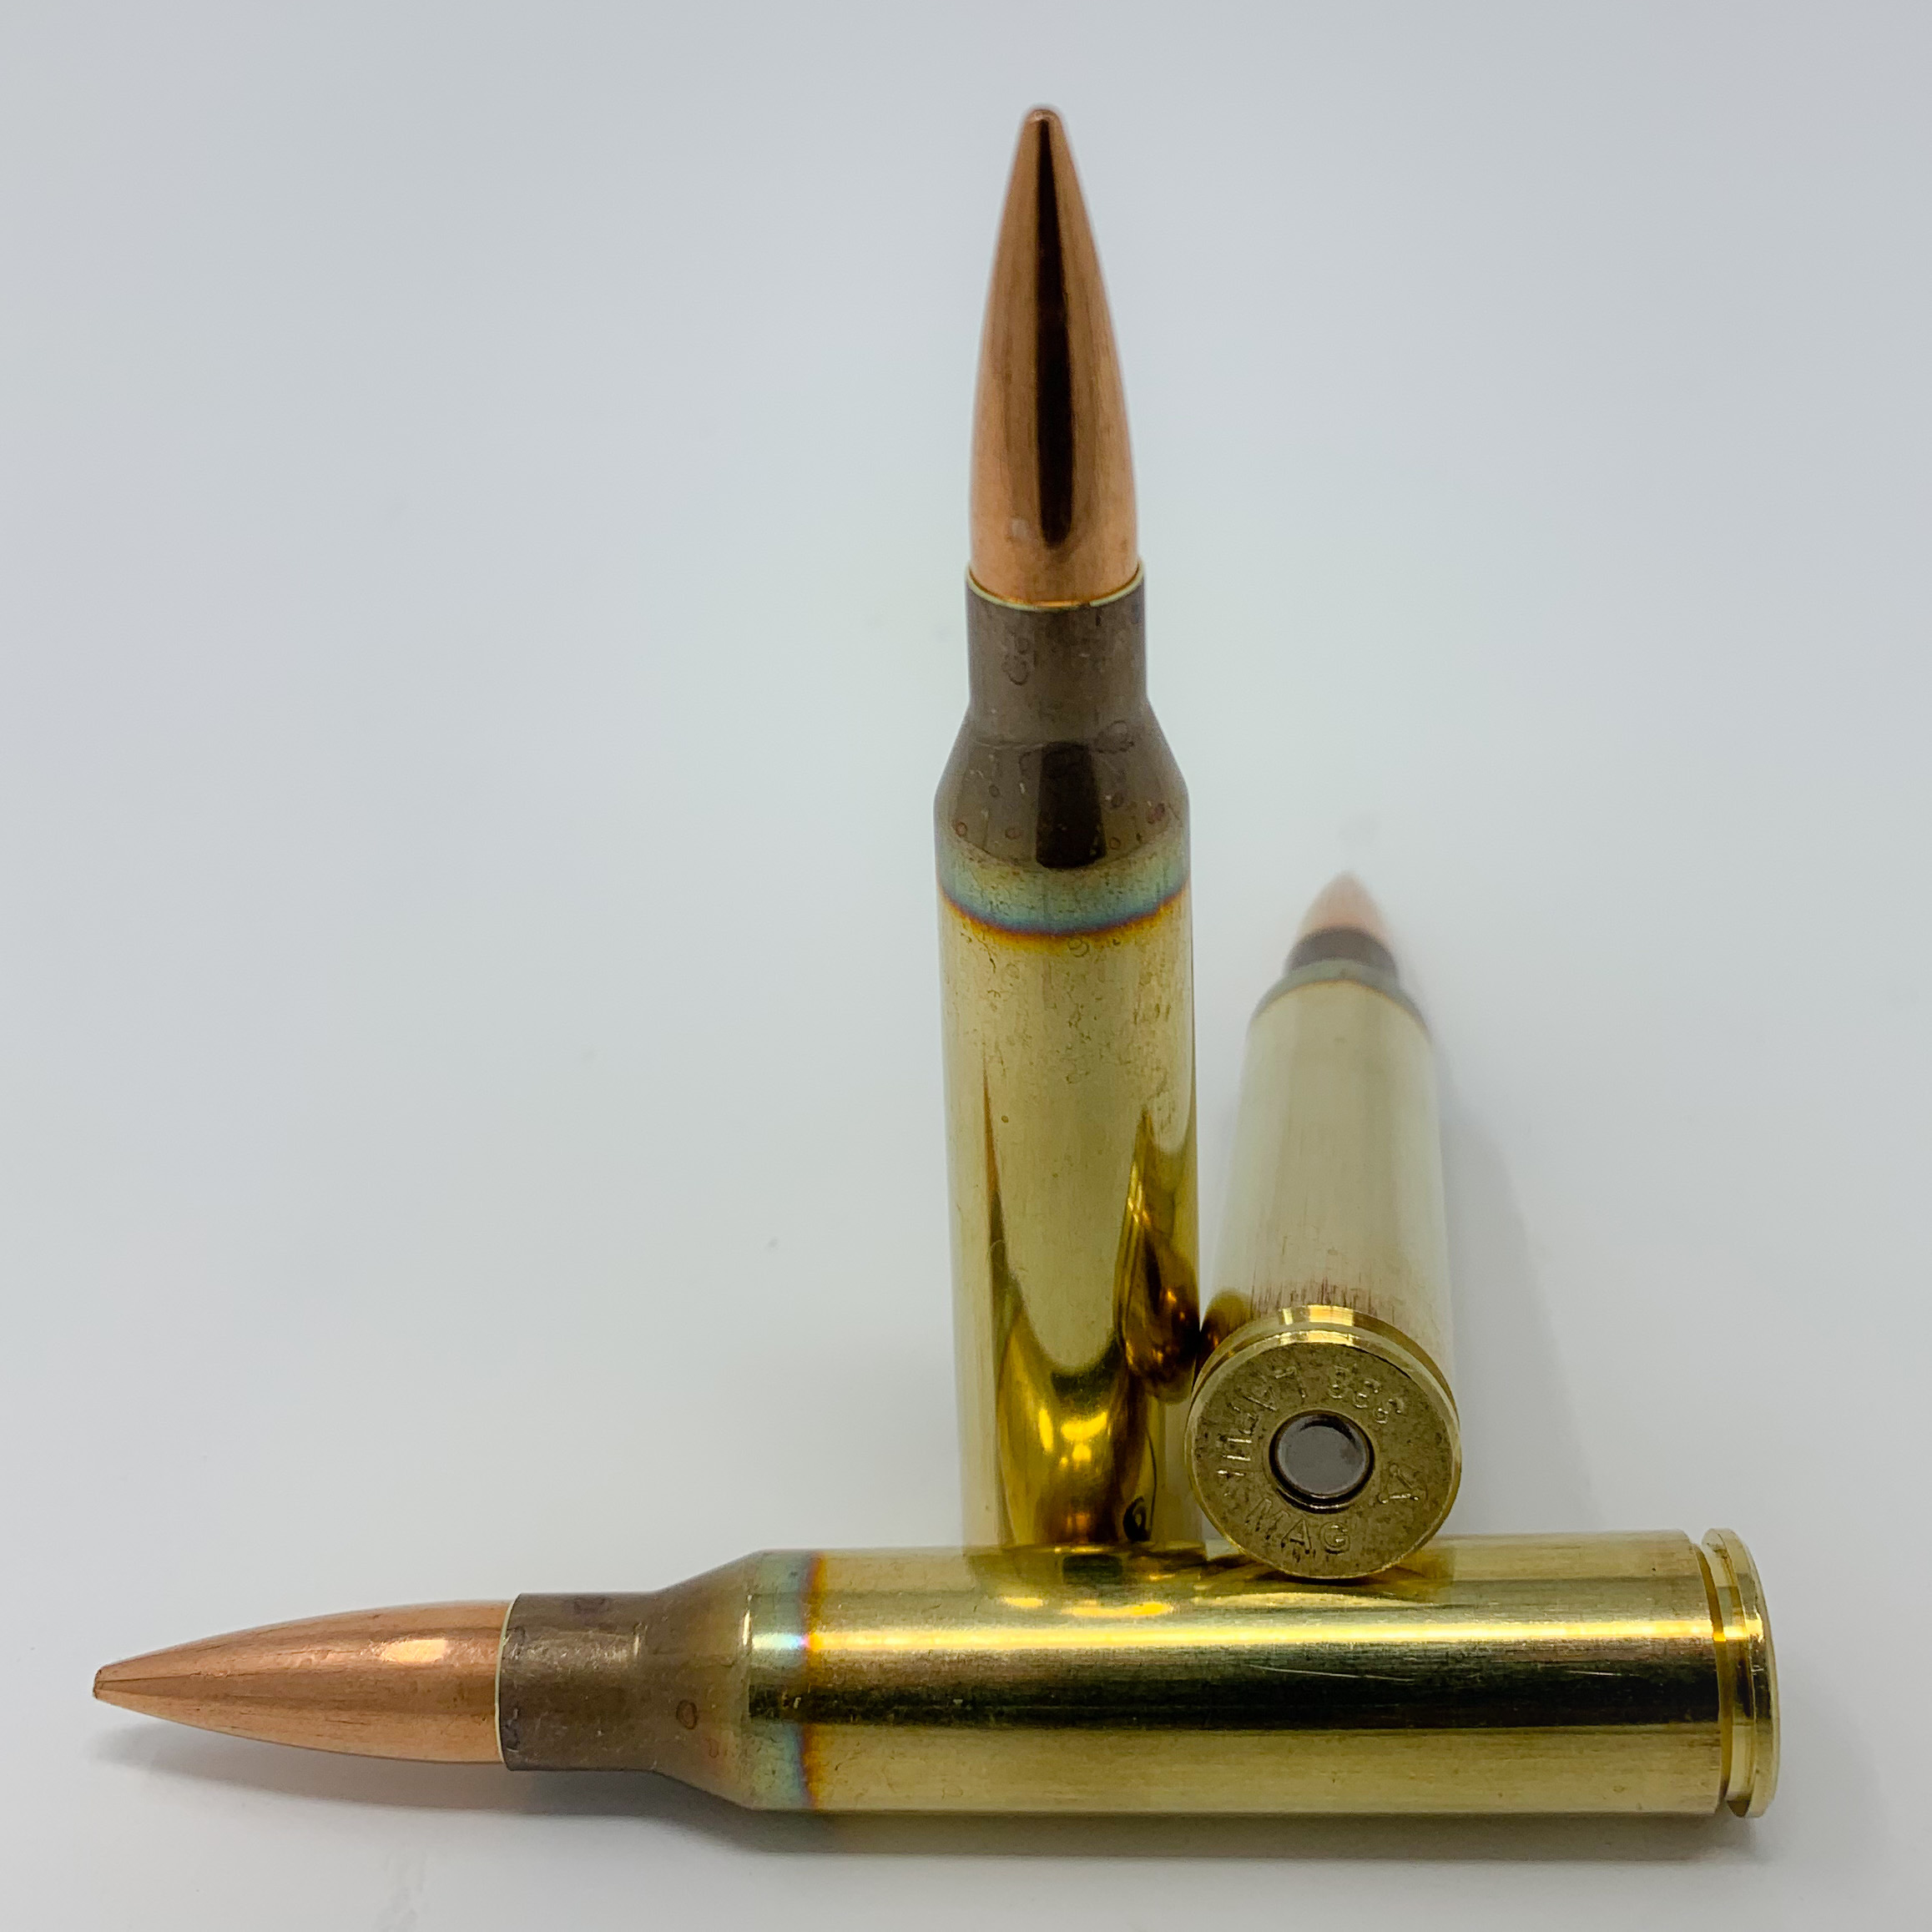 The.338 lapua magnum (8.6 × 70mm or 8.58 × 70mm) is a rimless, bottlenecked...